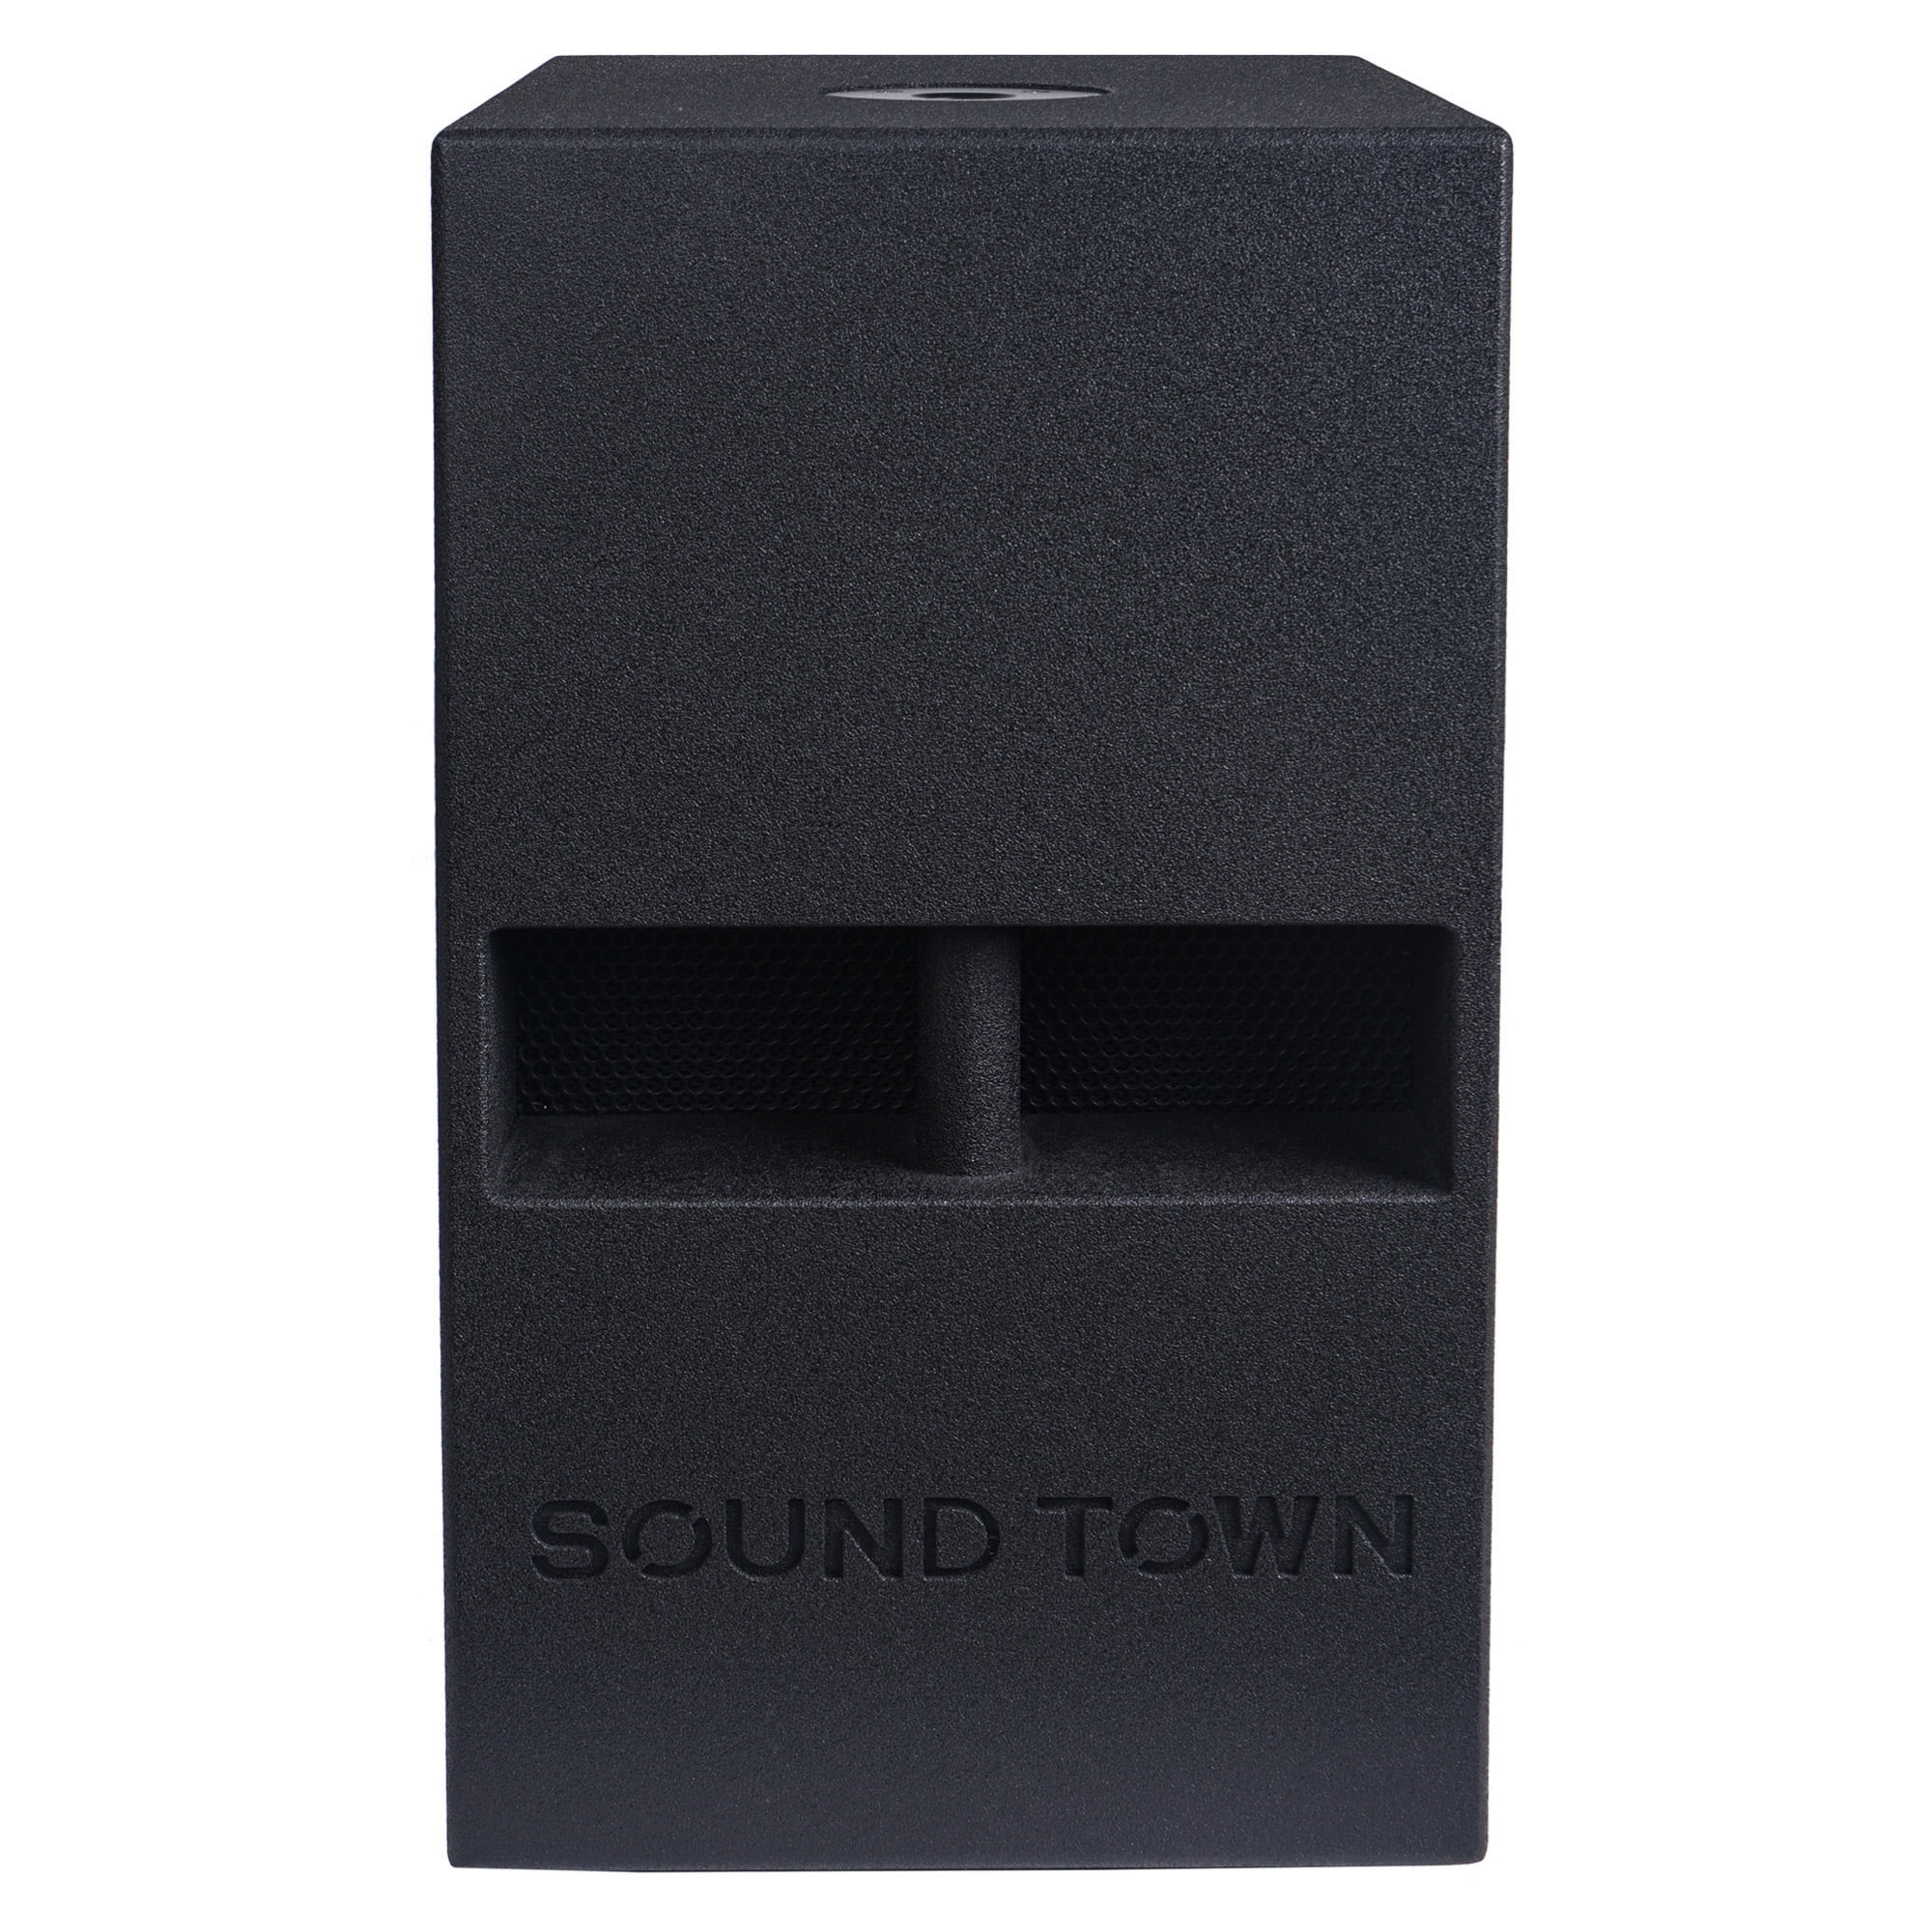 CARME-112SWPW Sound Town CARME Series 12” 800W Powered PA/DJ Subwoofer with Folded Horn Design White 